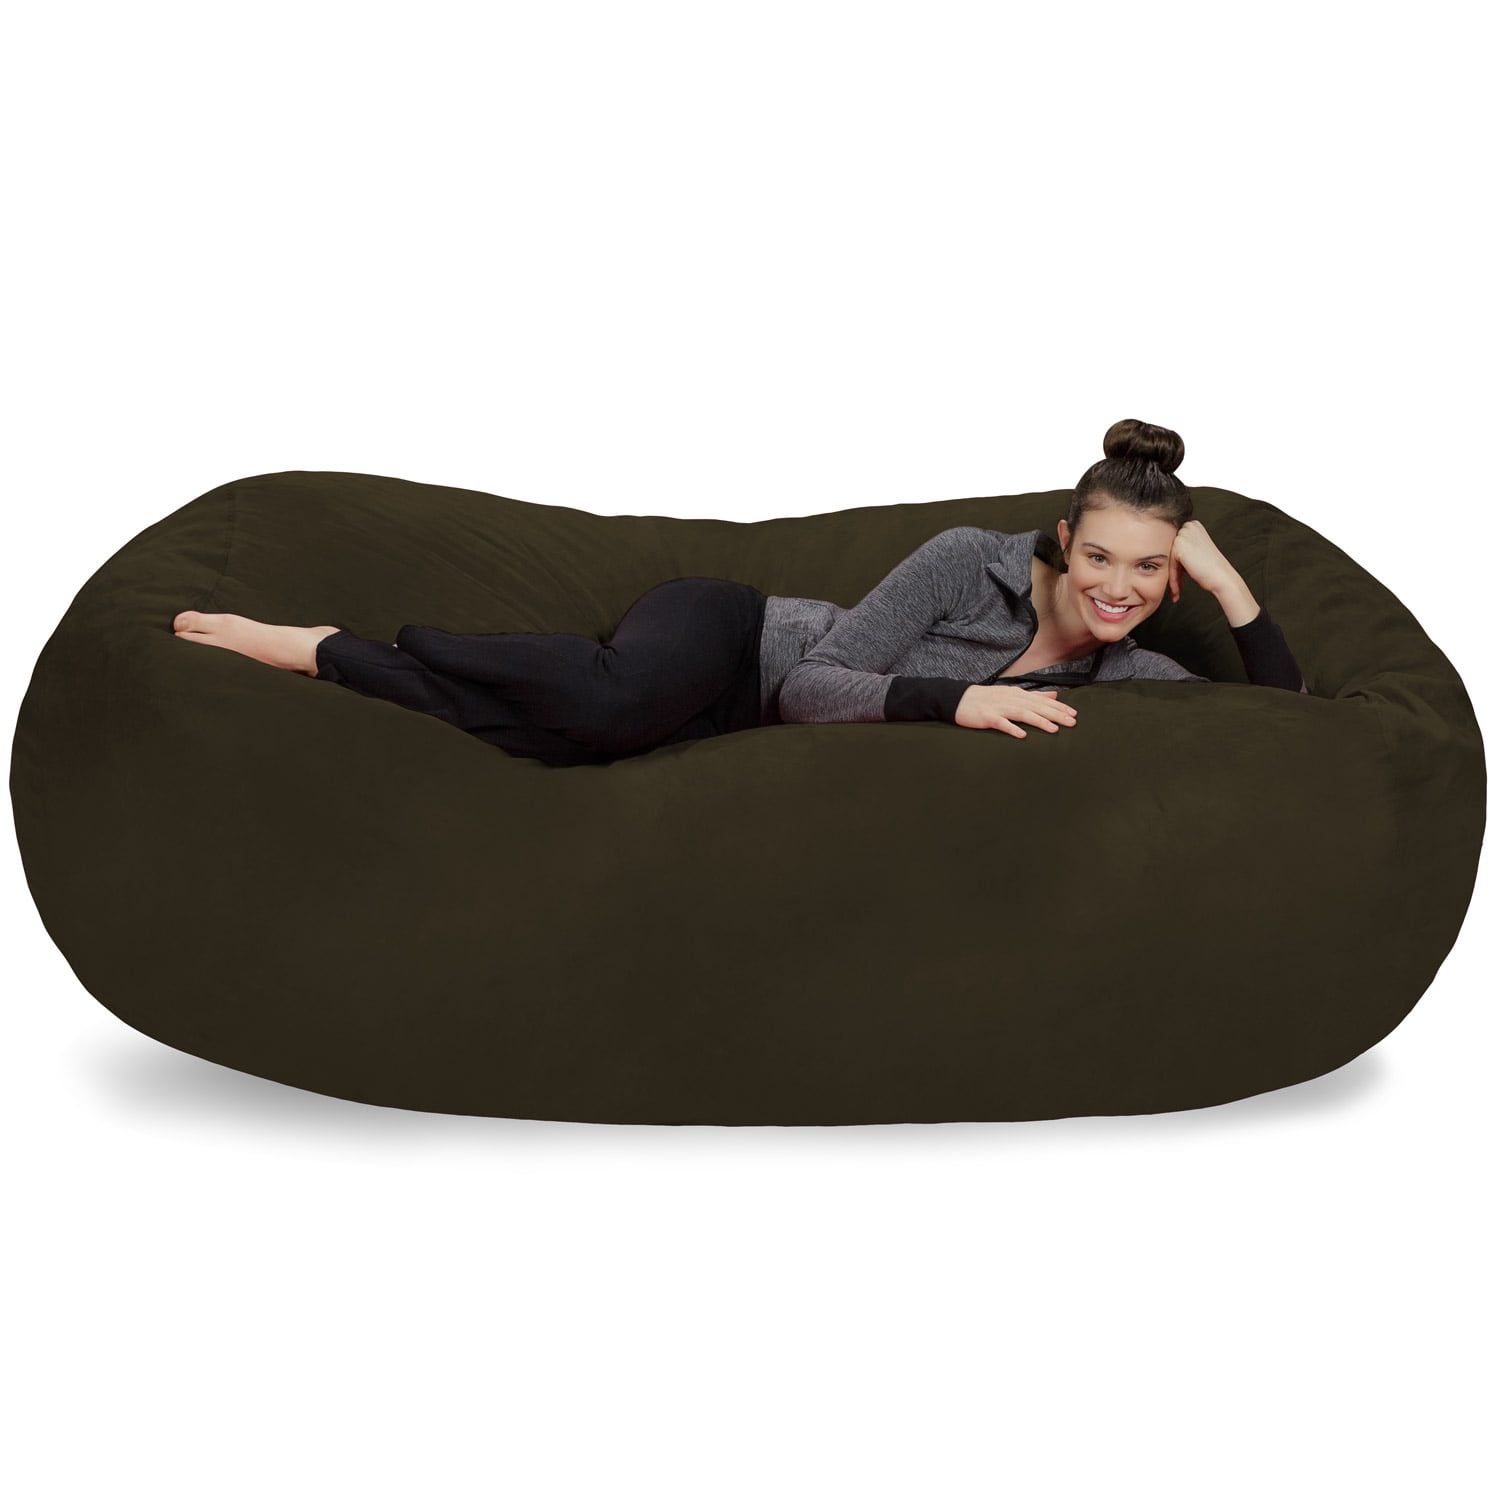 Ultimate Sack: Affordable, High Quality Bean Bag Chairs